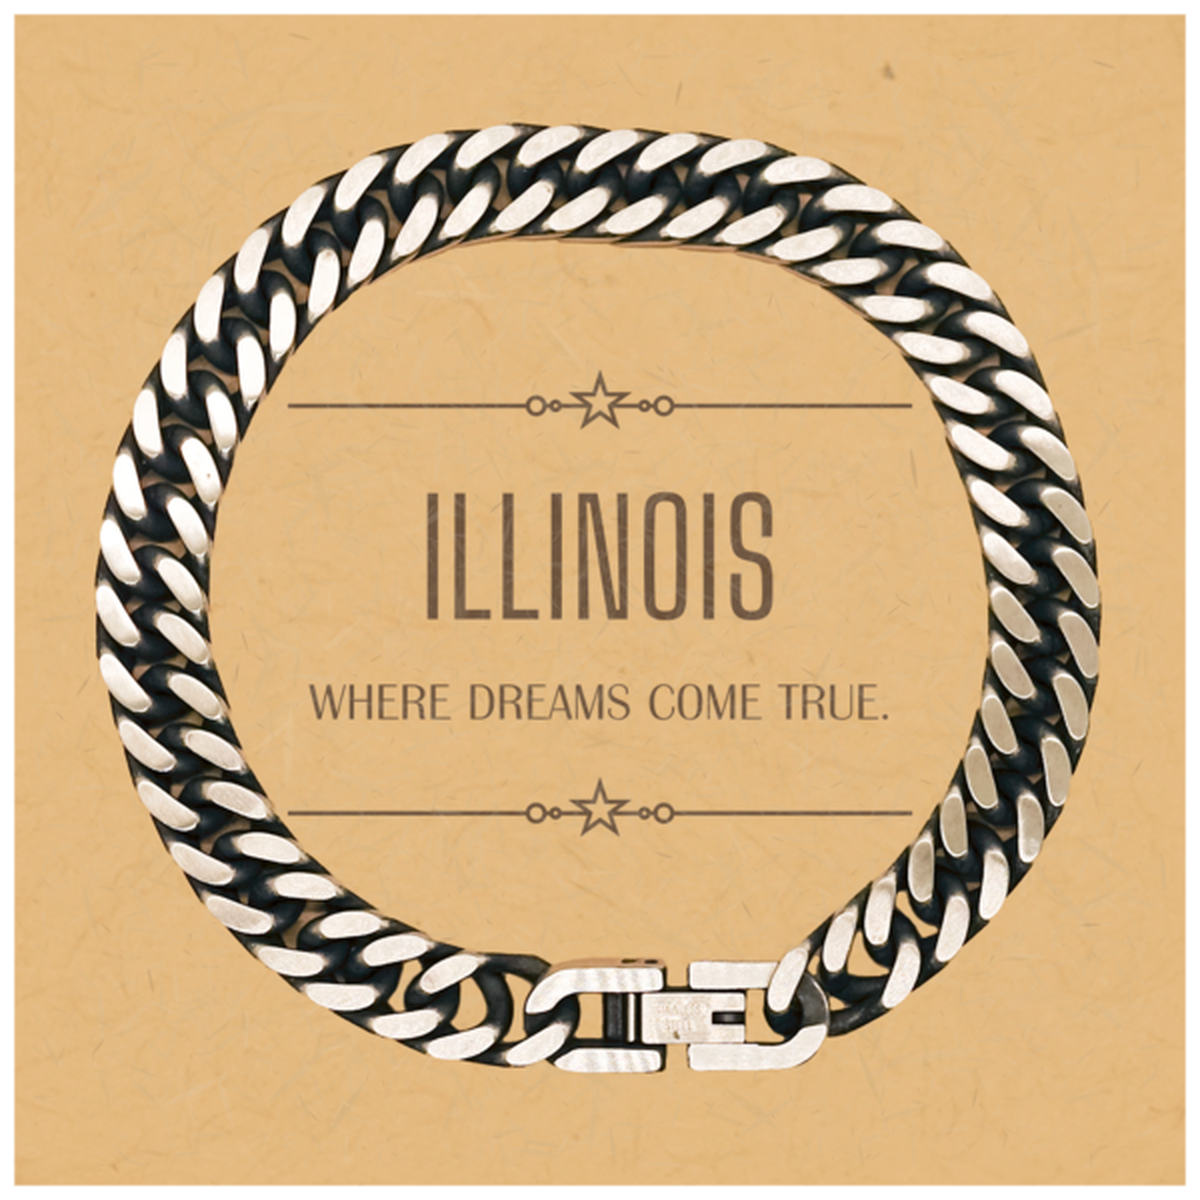 Love Illinois State Cuban Link Chain Bracelet, Illinois Where dreams come true, Birthday Christmas Inspirational Gifts For Illinois Men, Women, Friends